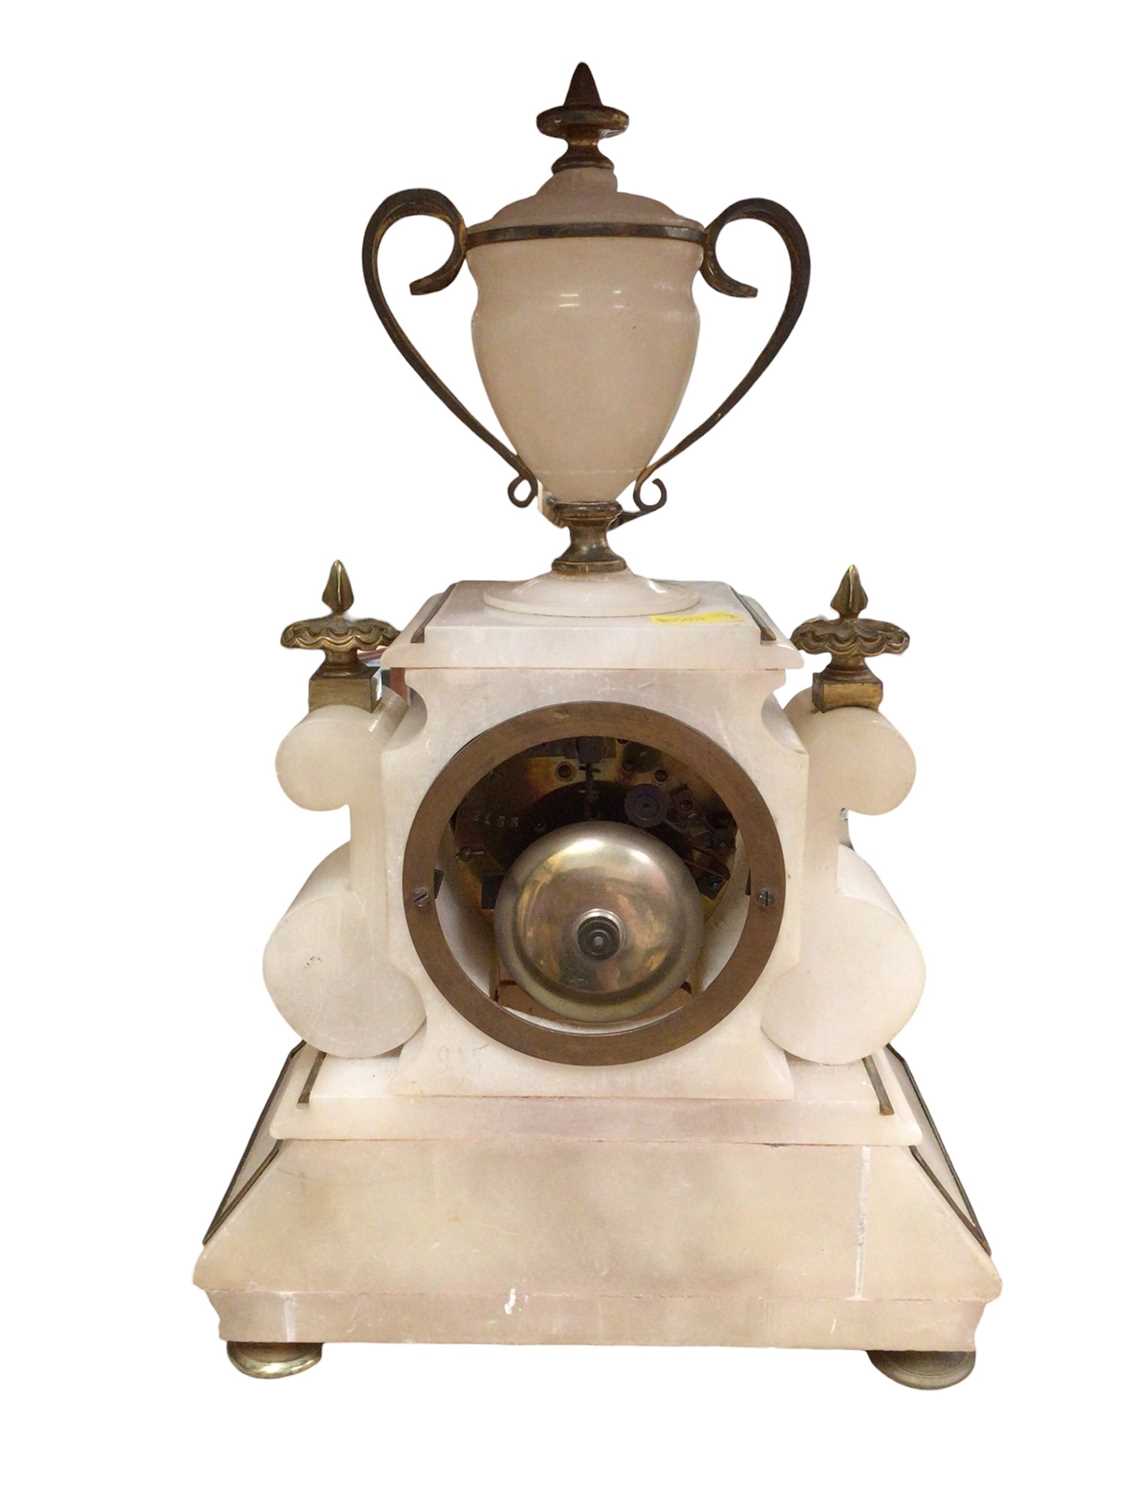 Victorian alabaster mantle clock with brass mounts, 36.5cm high - Image 2 of 6